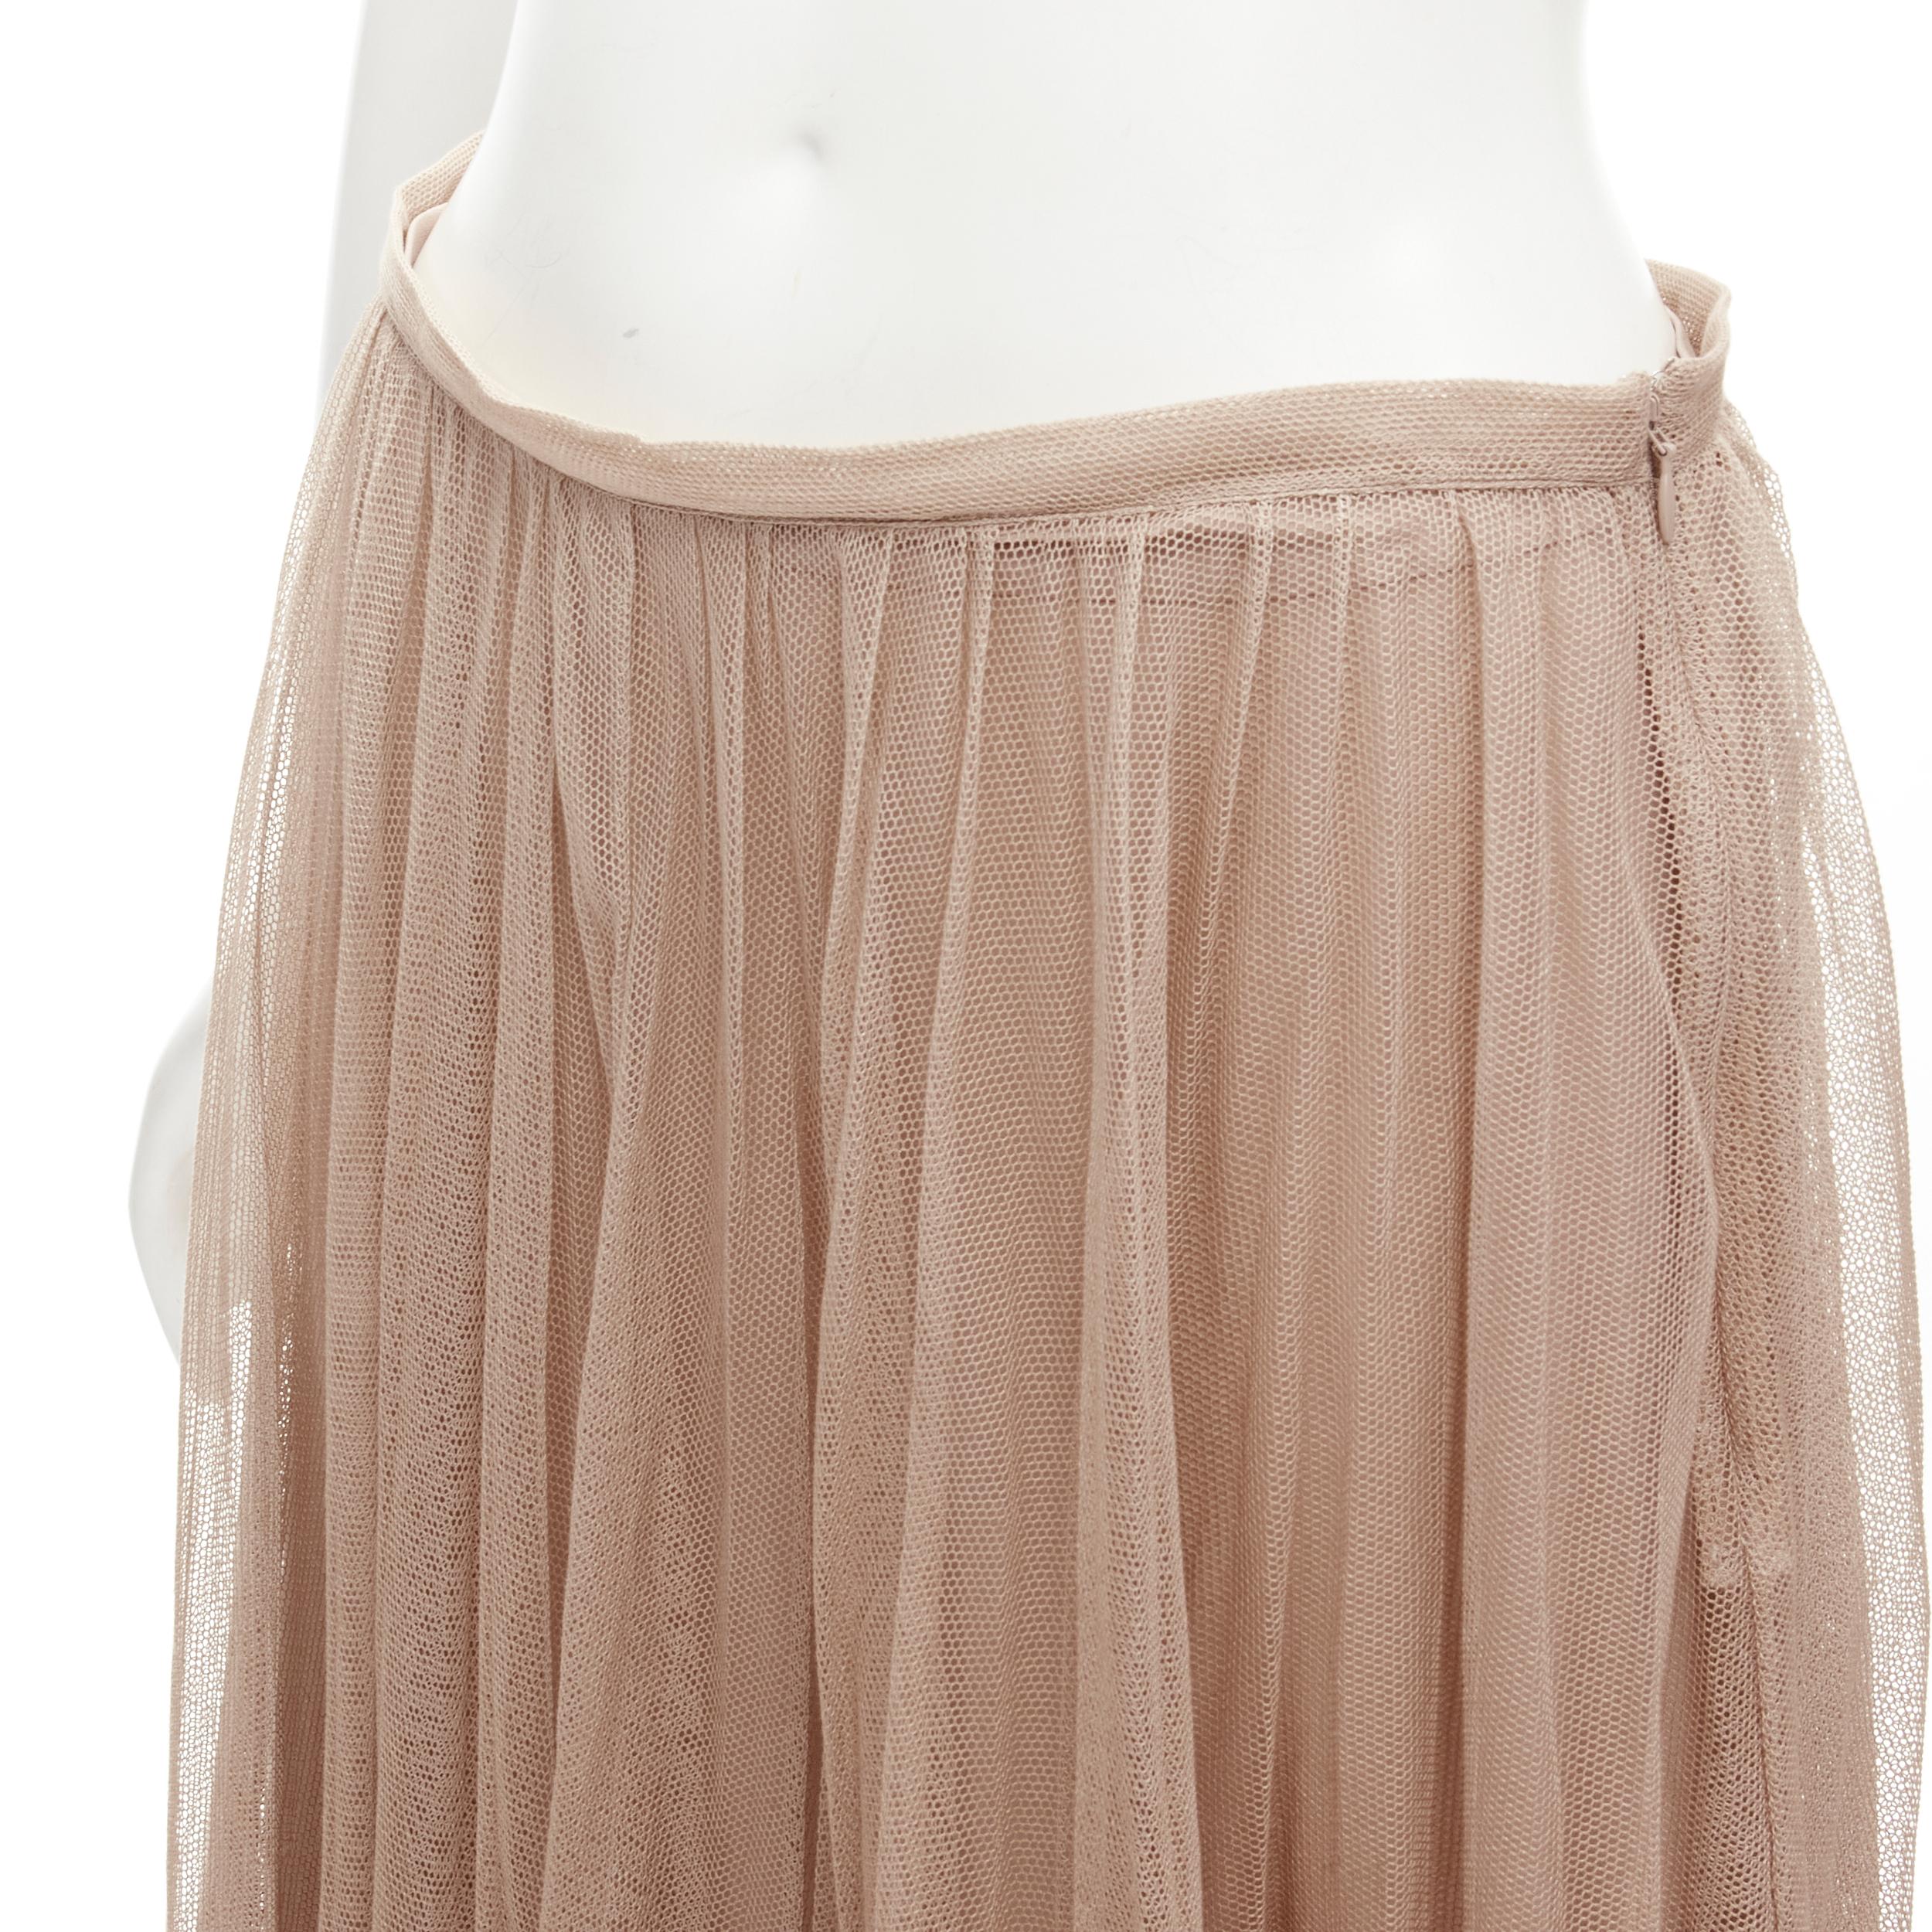 CHRISTIAN DIOR blush beige mesh pleated tulle layered skirt FR40 M
Brand: Christian Dior
Material: Silk
Color: Beige
Pattern: Solid
Closure: Zip
Extra Detail: Mesh pleated outer skirt. Fully lined in blush pink silk lining. Raw cut hem.
Made in: